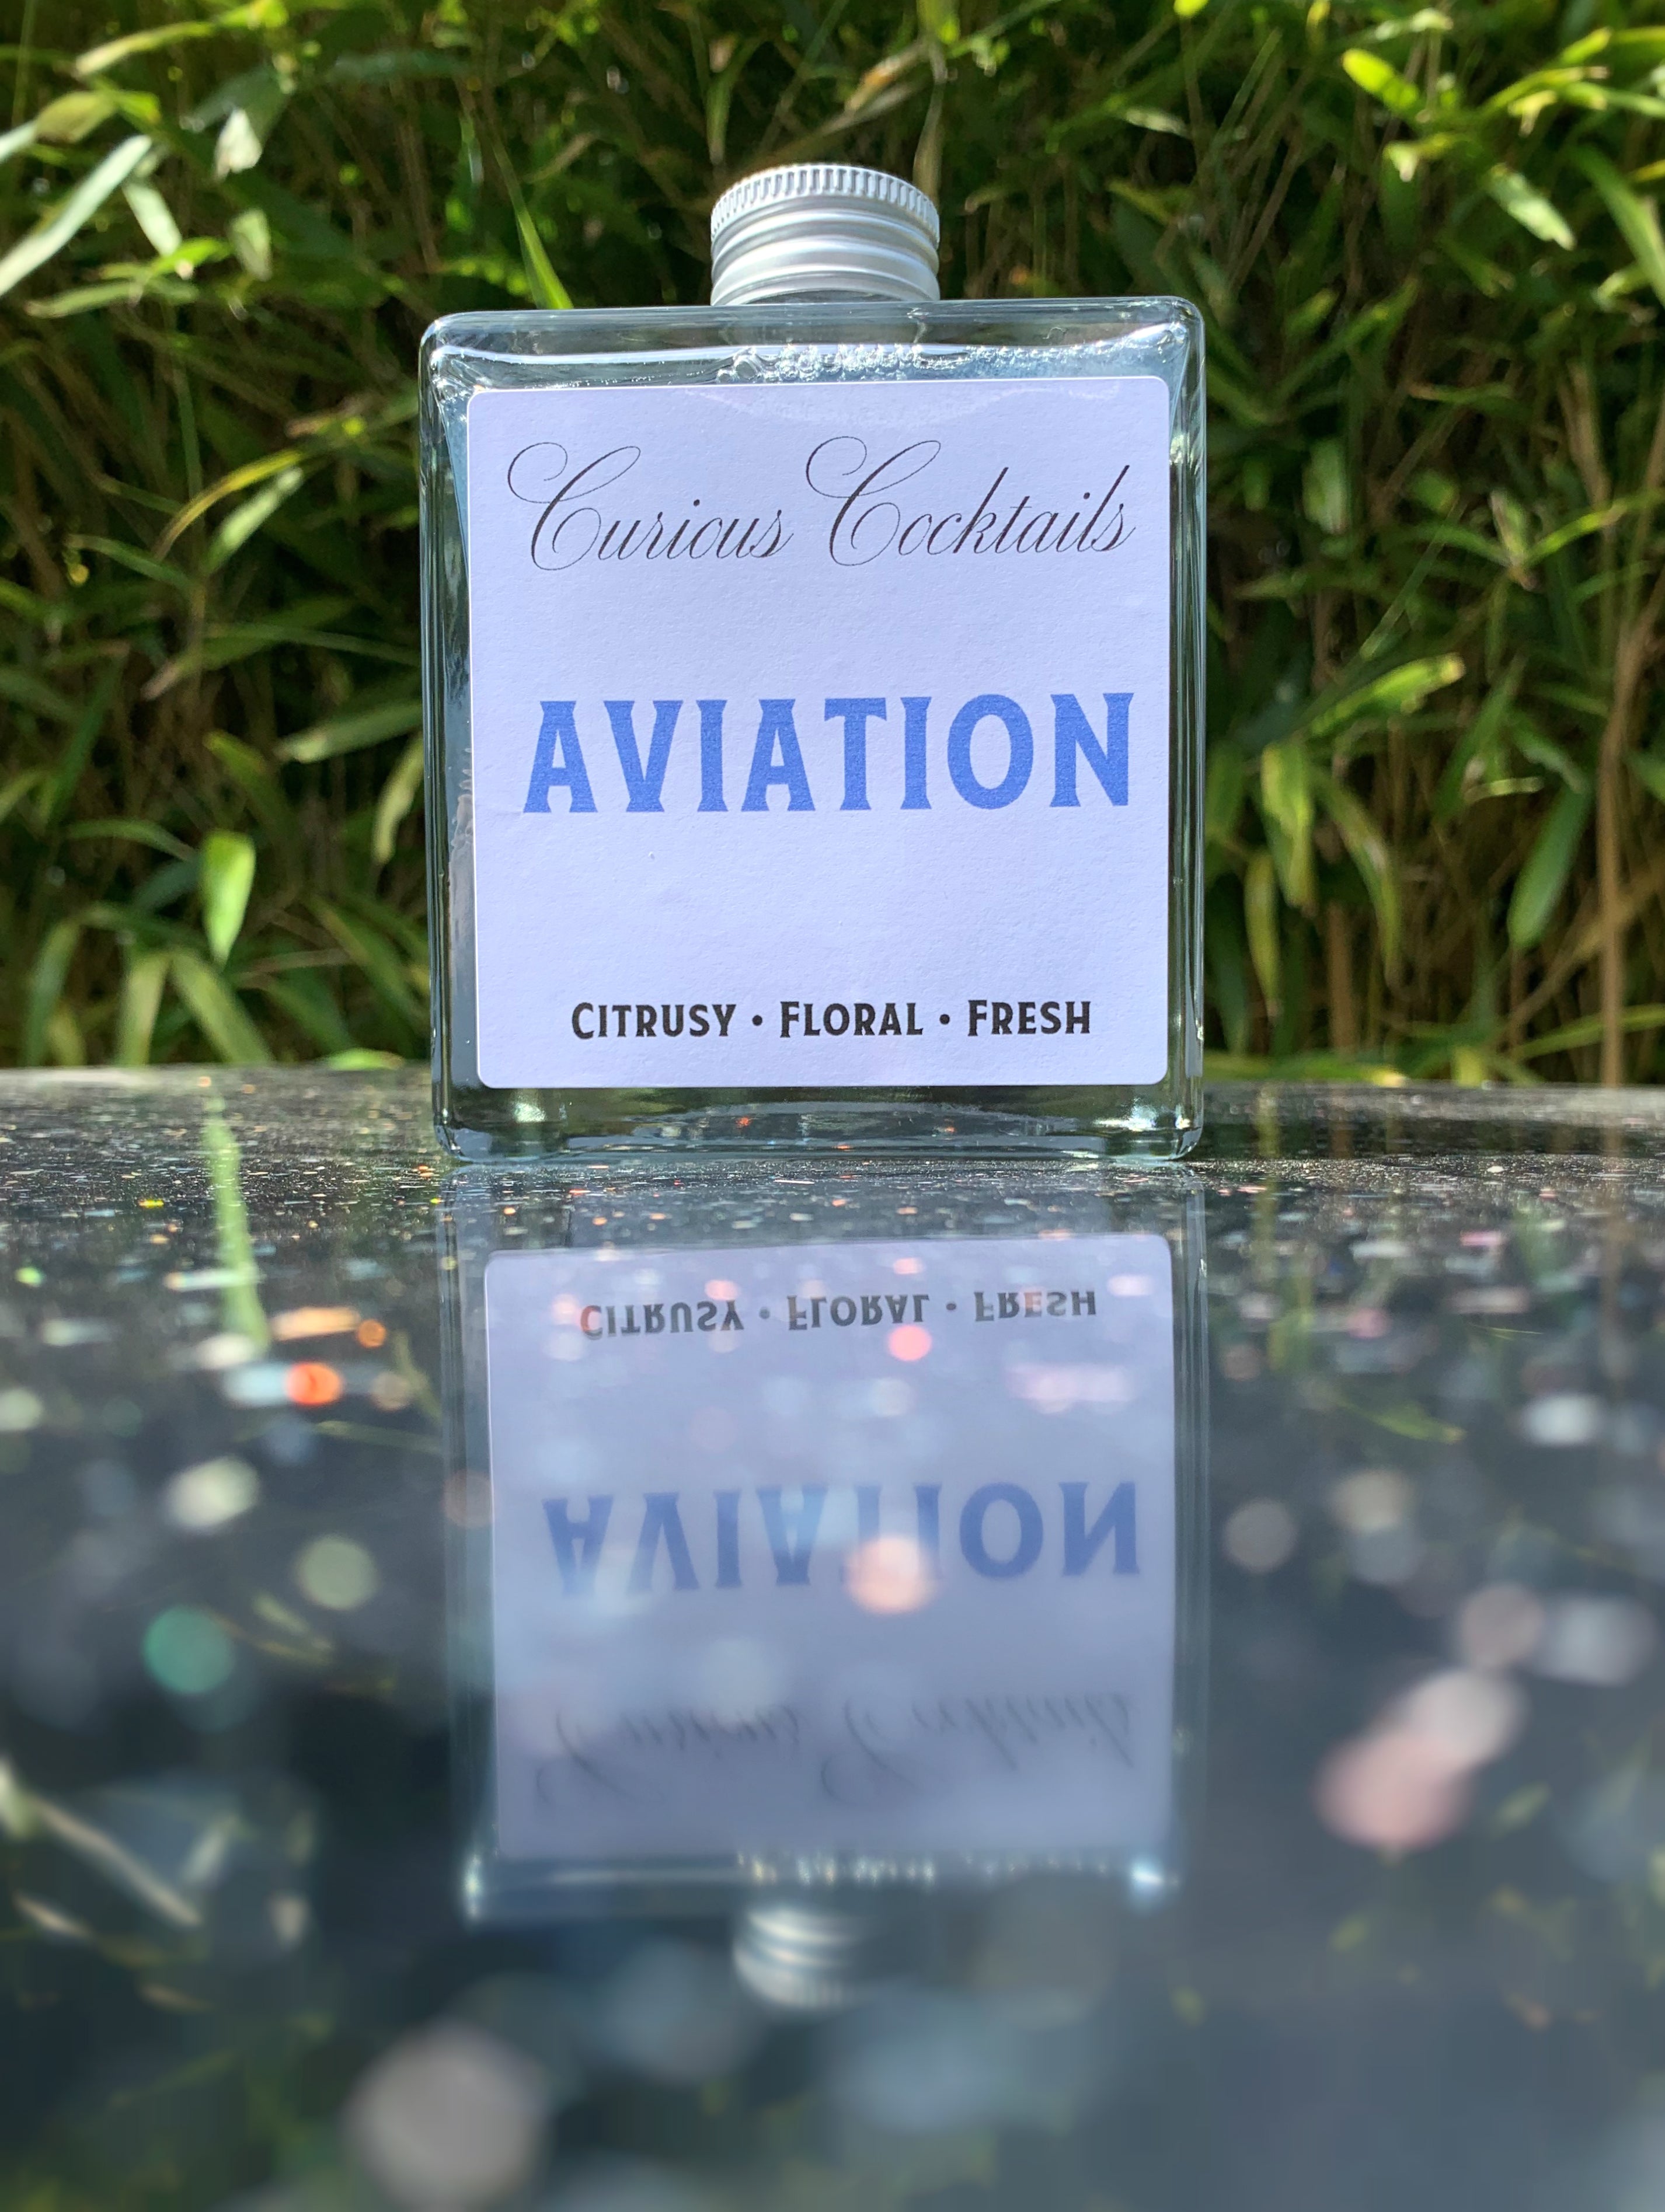 Curious Cocktails: Aviation 500ml Glass Bottle (Save £9)